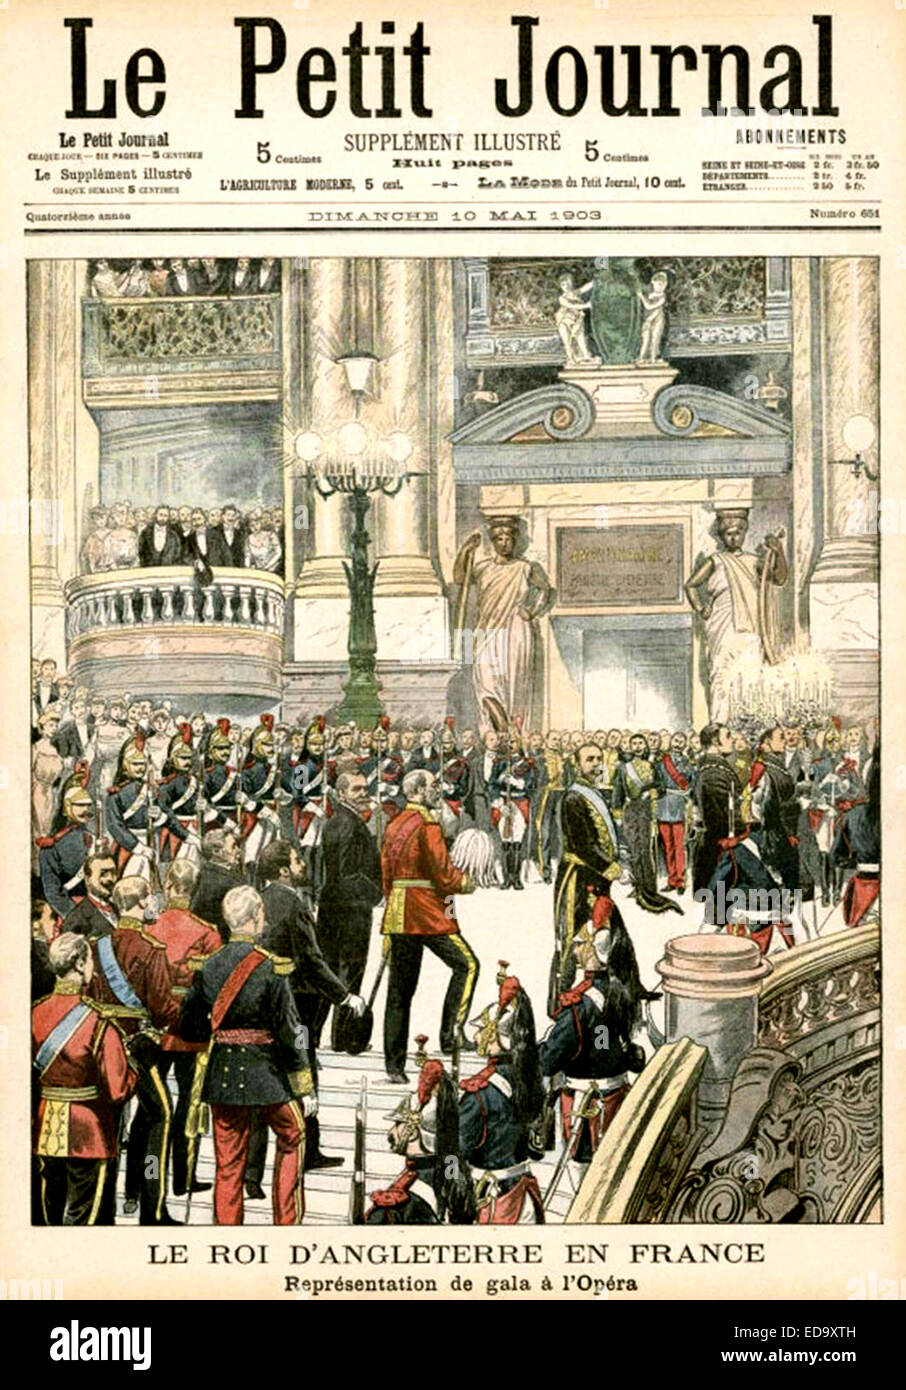 EDWARD VII at the Paris Opera in May 1903 as shown on the cover of the French weekly magazine Le Petit Journal Stock Photo